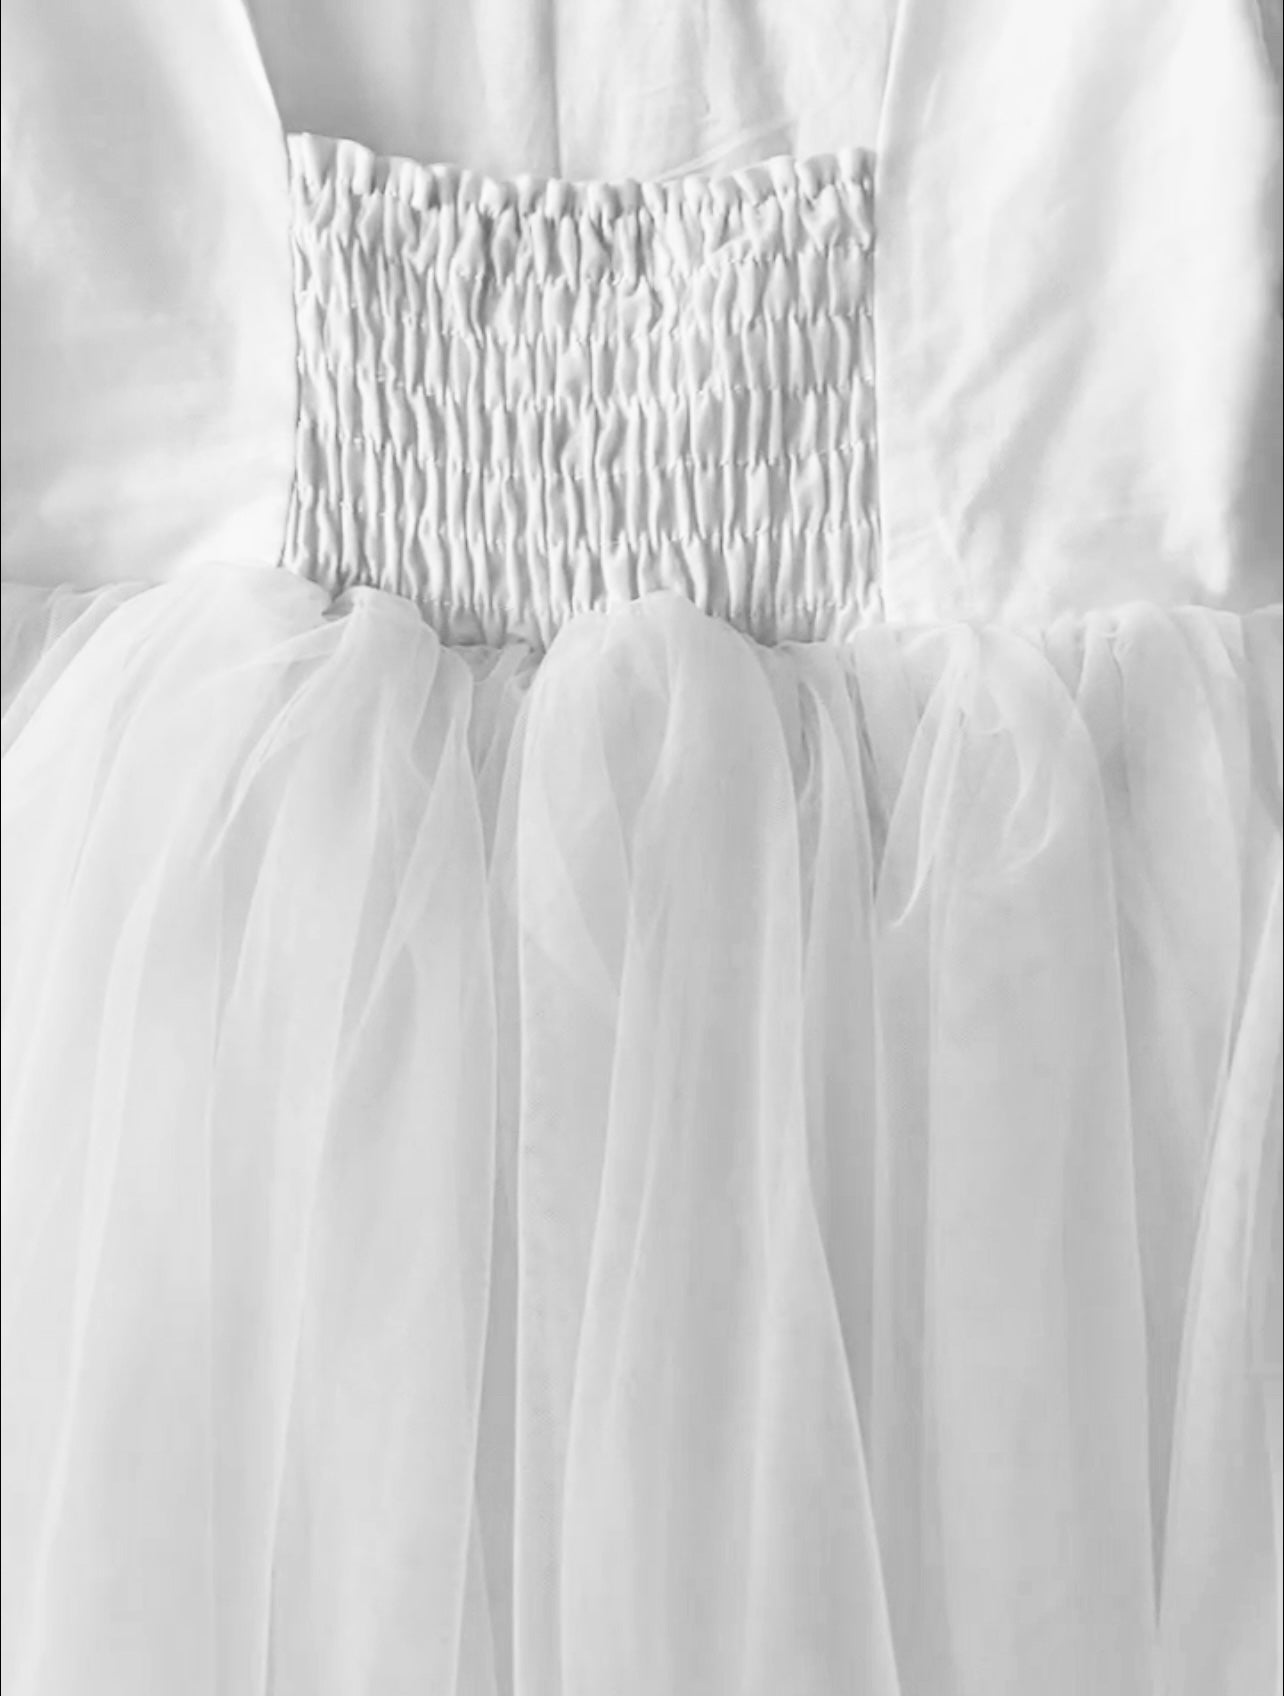 DOLLY by Le Petit Tom ® TULLE BABYDOLL DRESS white